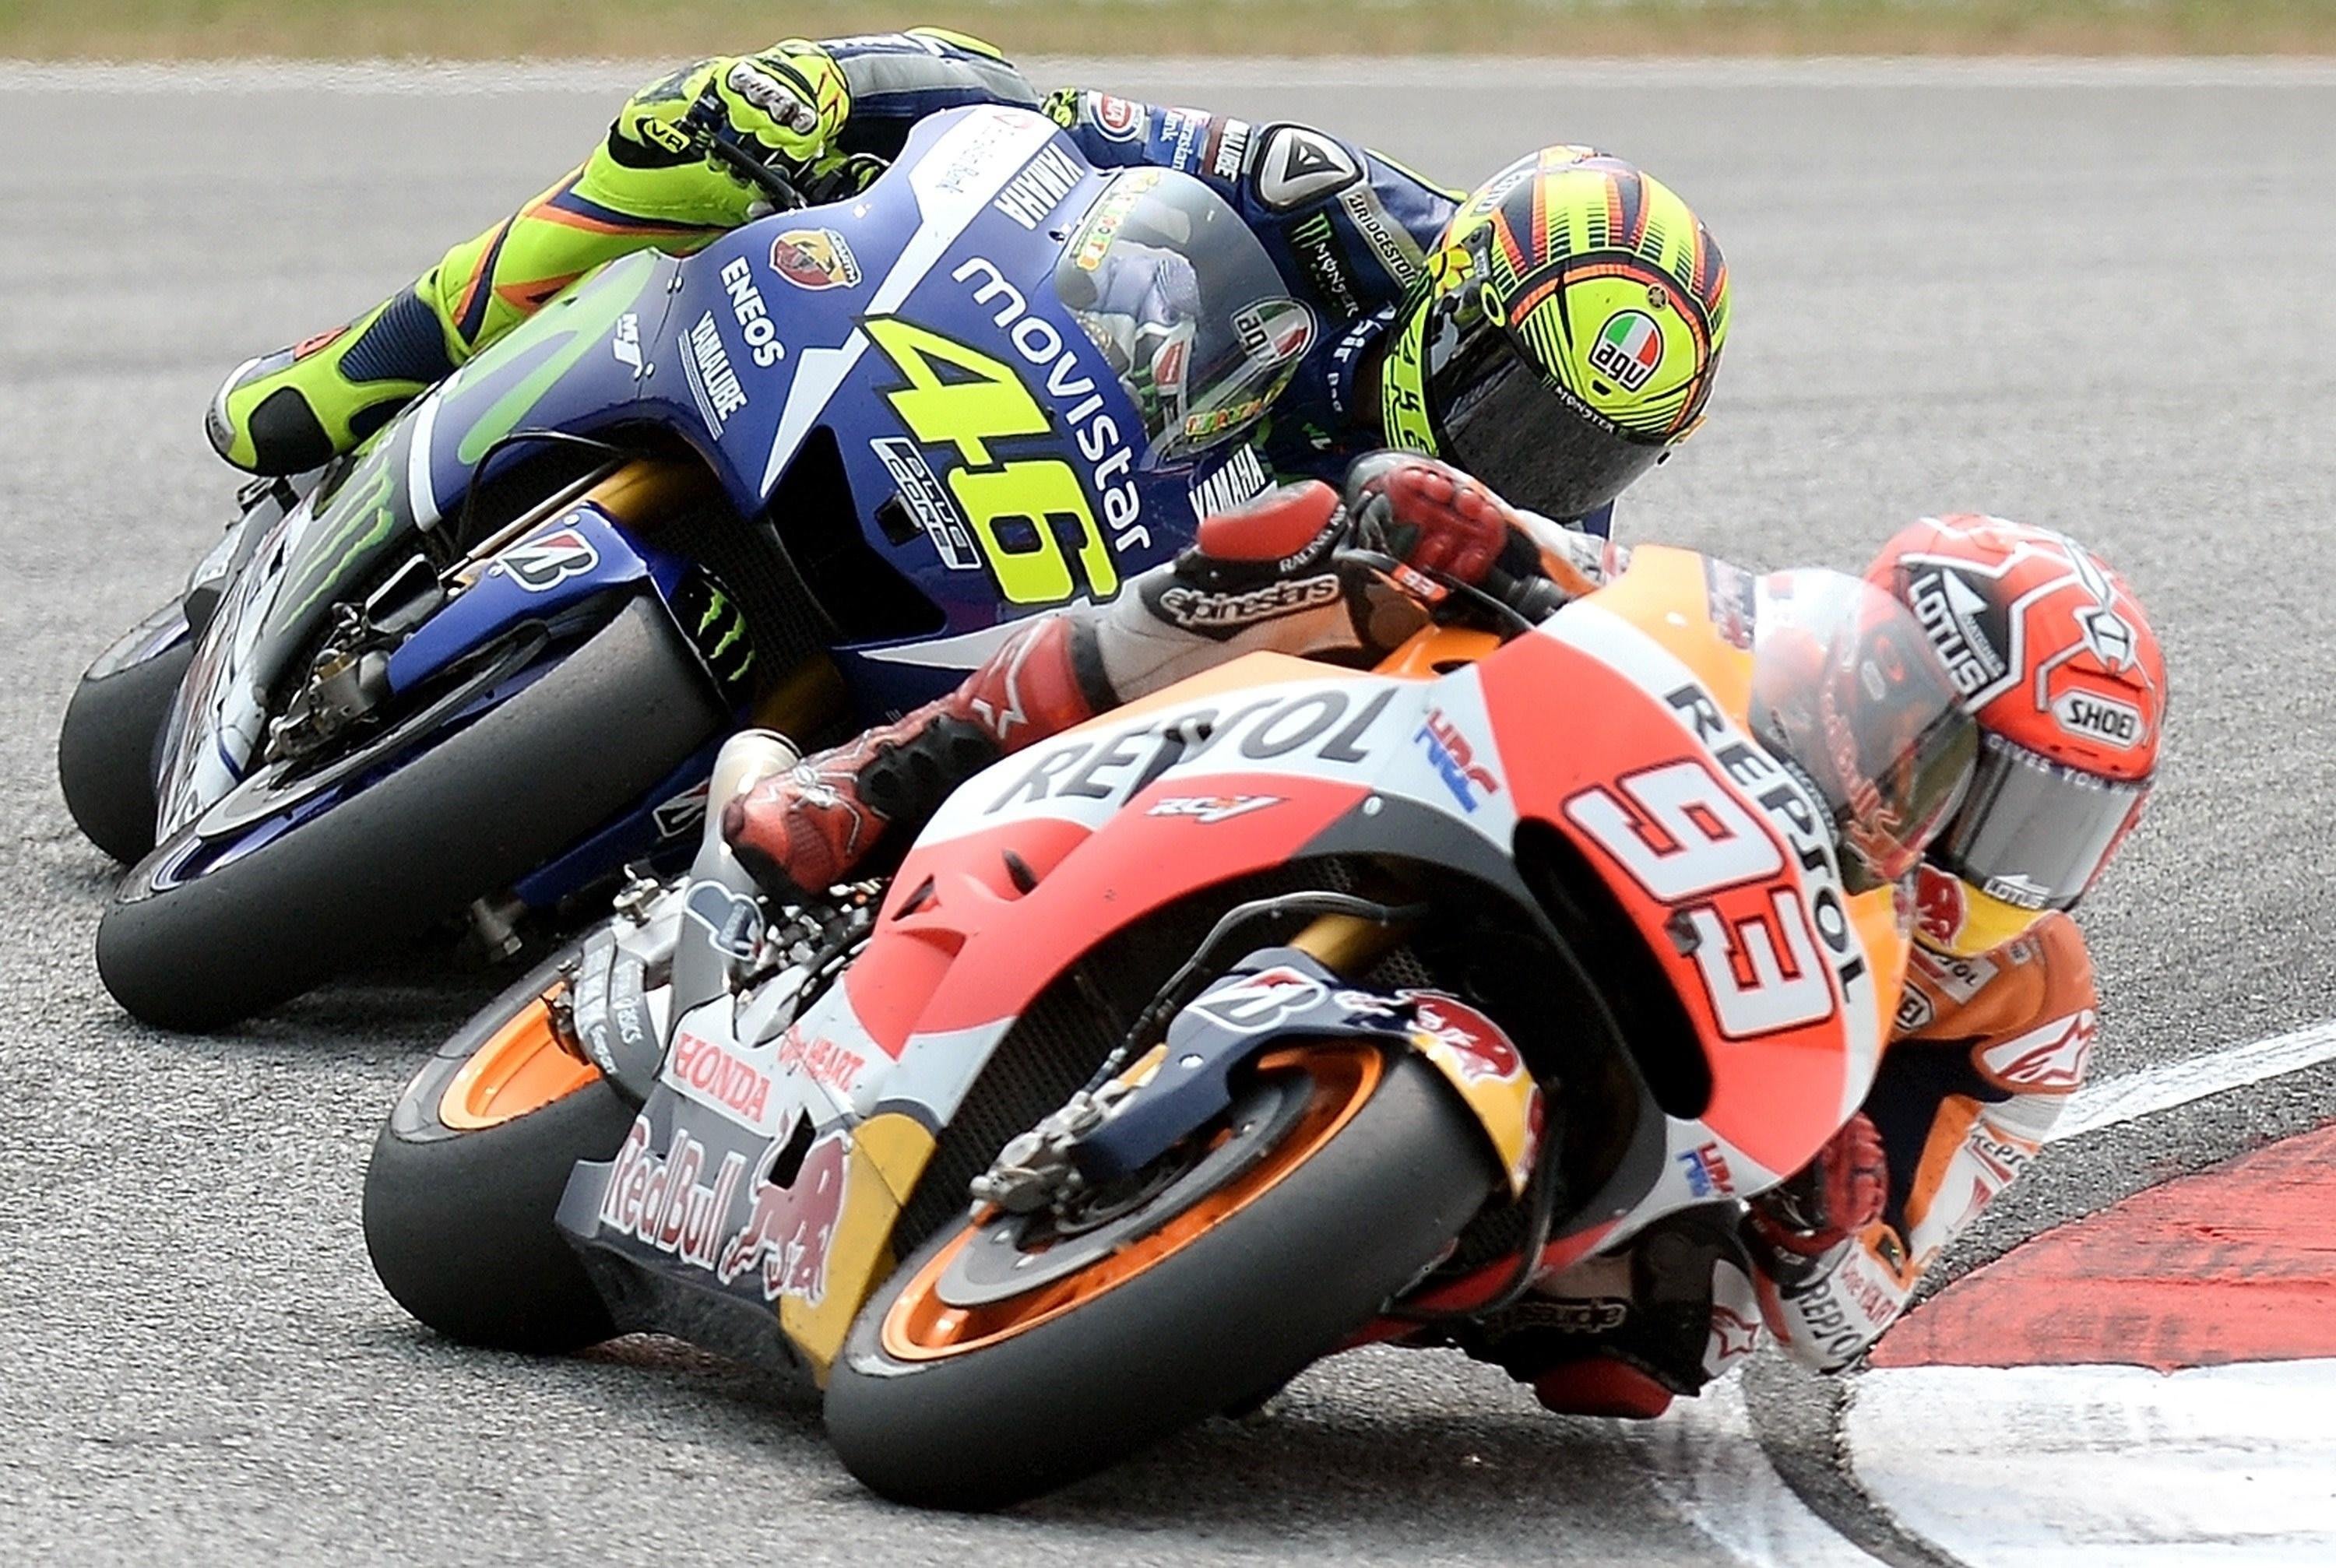 MotoGP: 15 things you never knew about Valentino Rossi